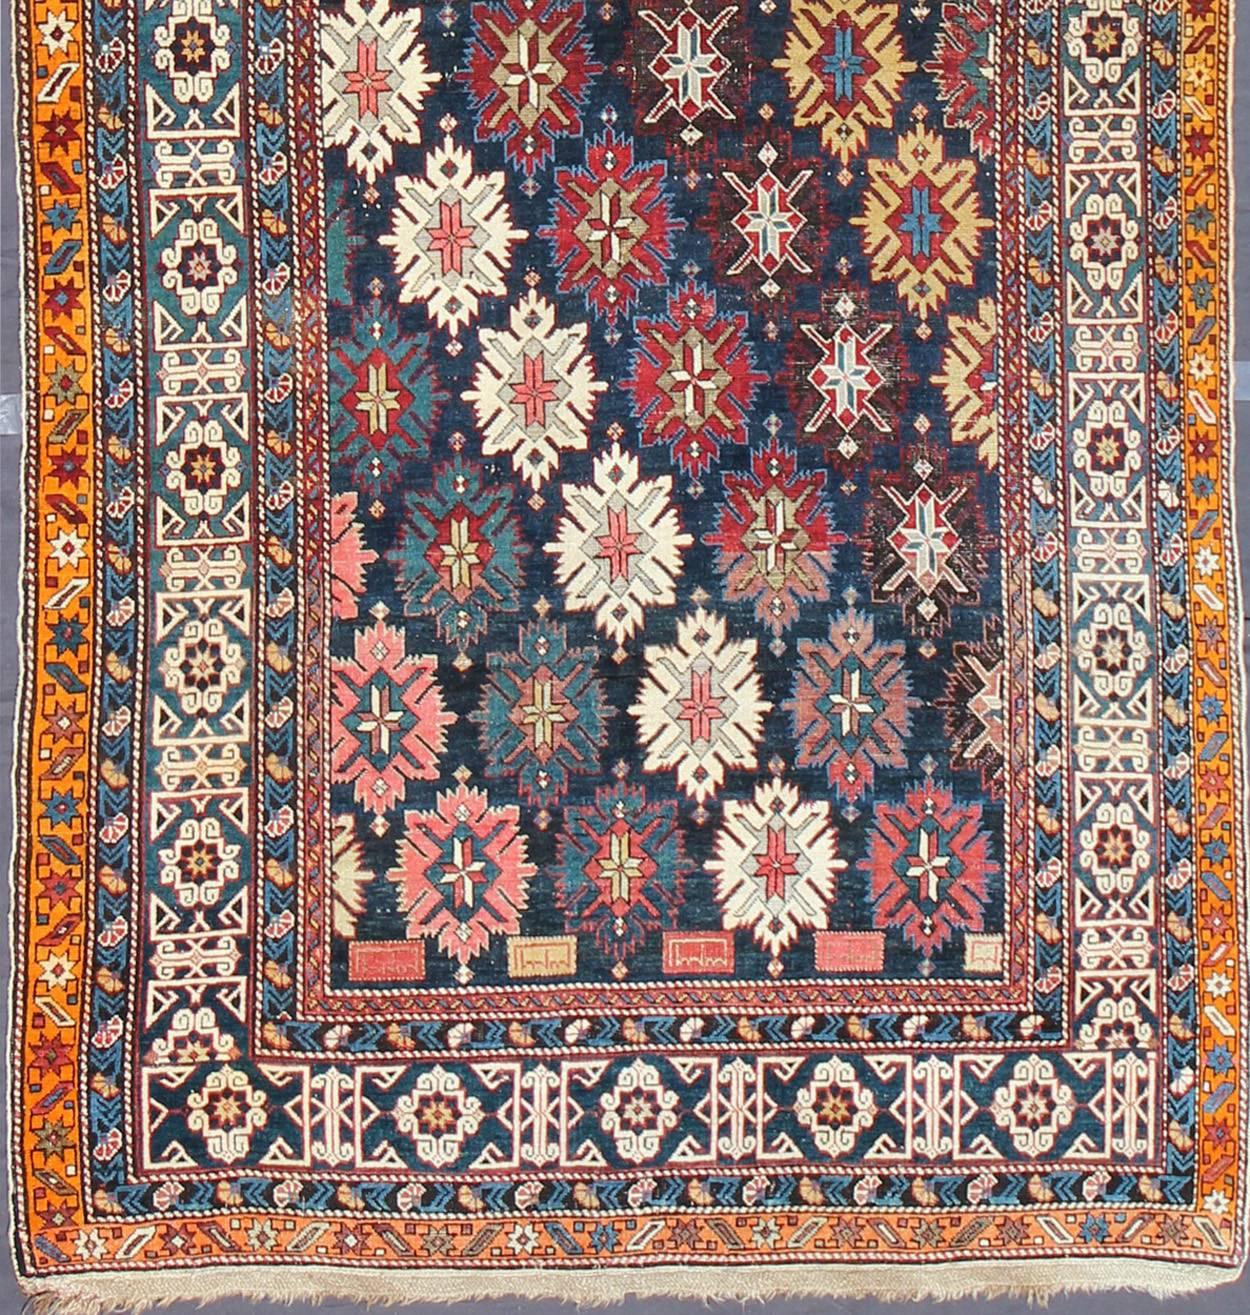 Colorful antique Kuba long and wide runner with multi-medallions and sub-geometric borders, rug 17-0804, country of origin / type: Caucasus / Kuba, circa 1880 gallery runner, large Caucasian

This colorful antique Kuba runner from the late 19th